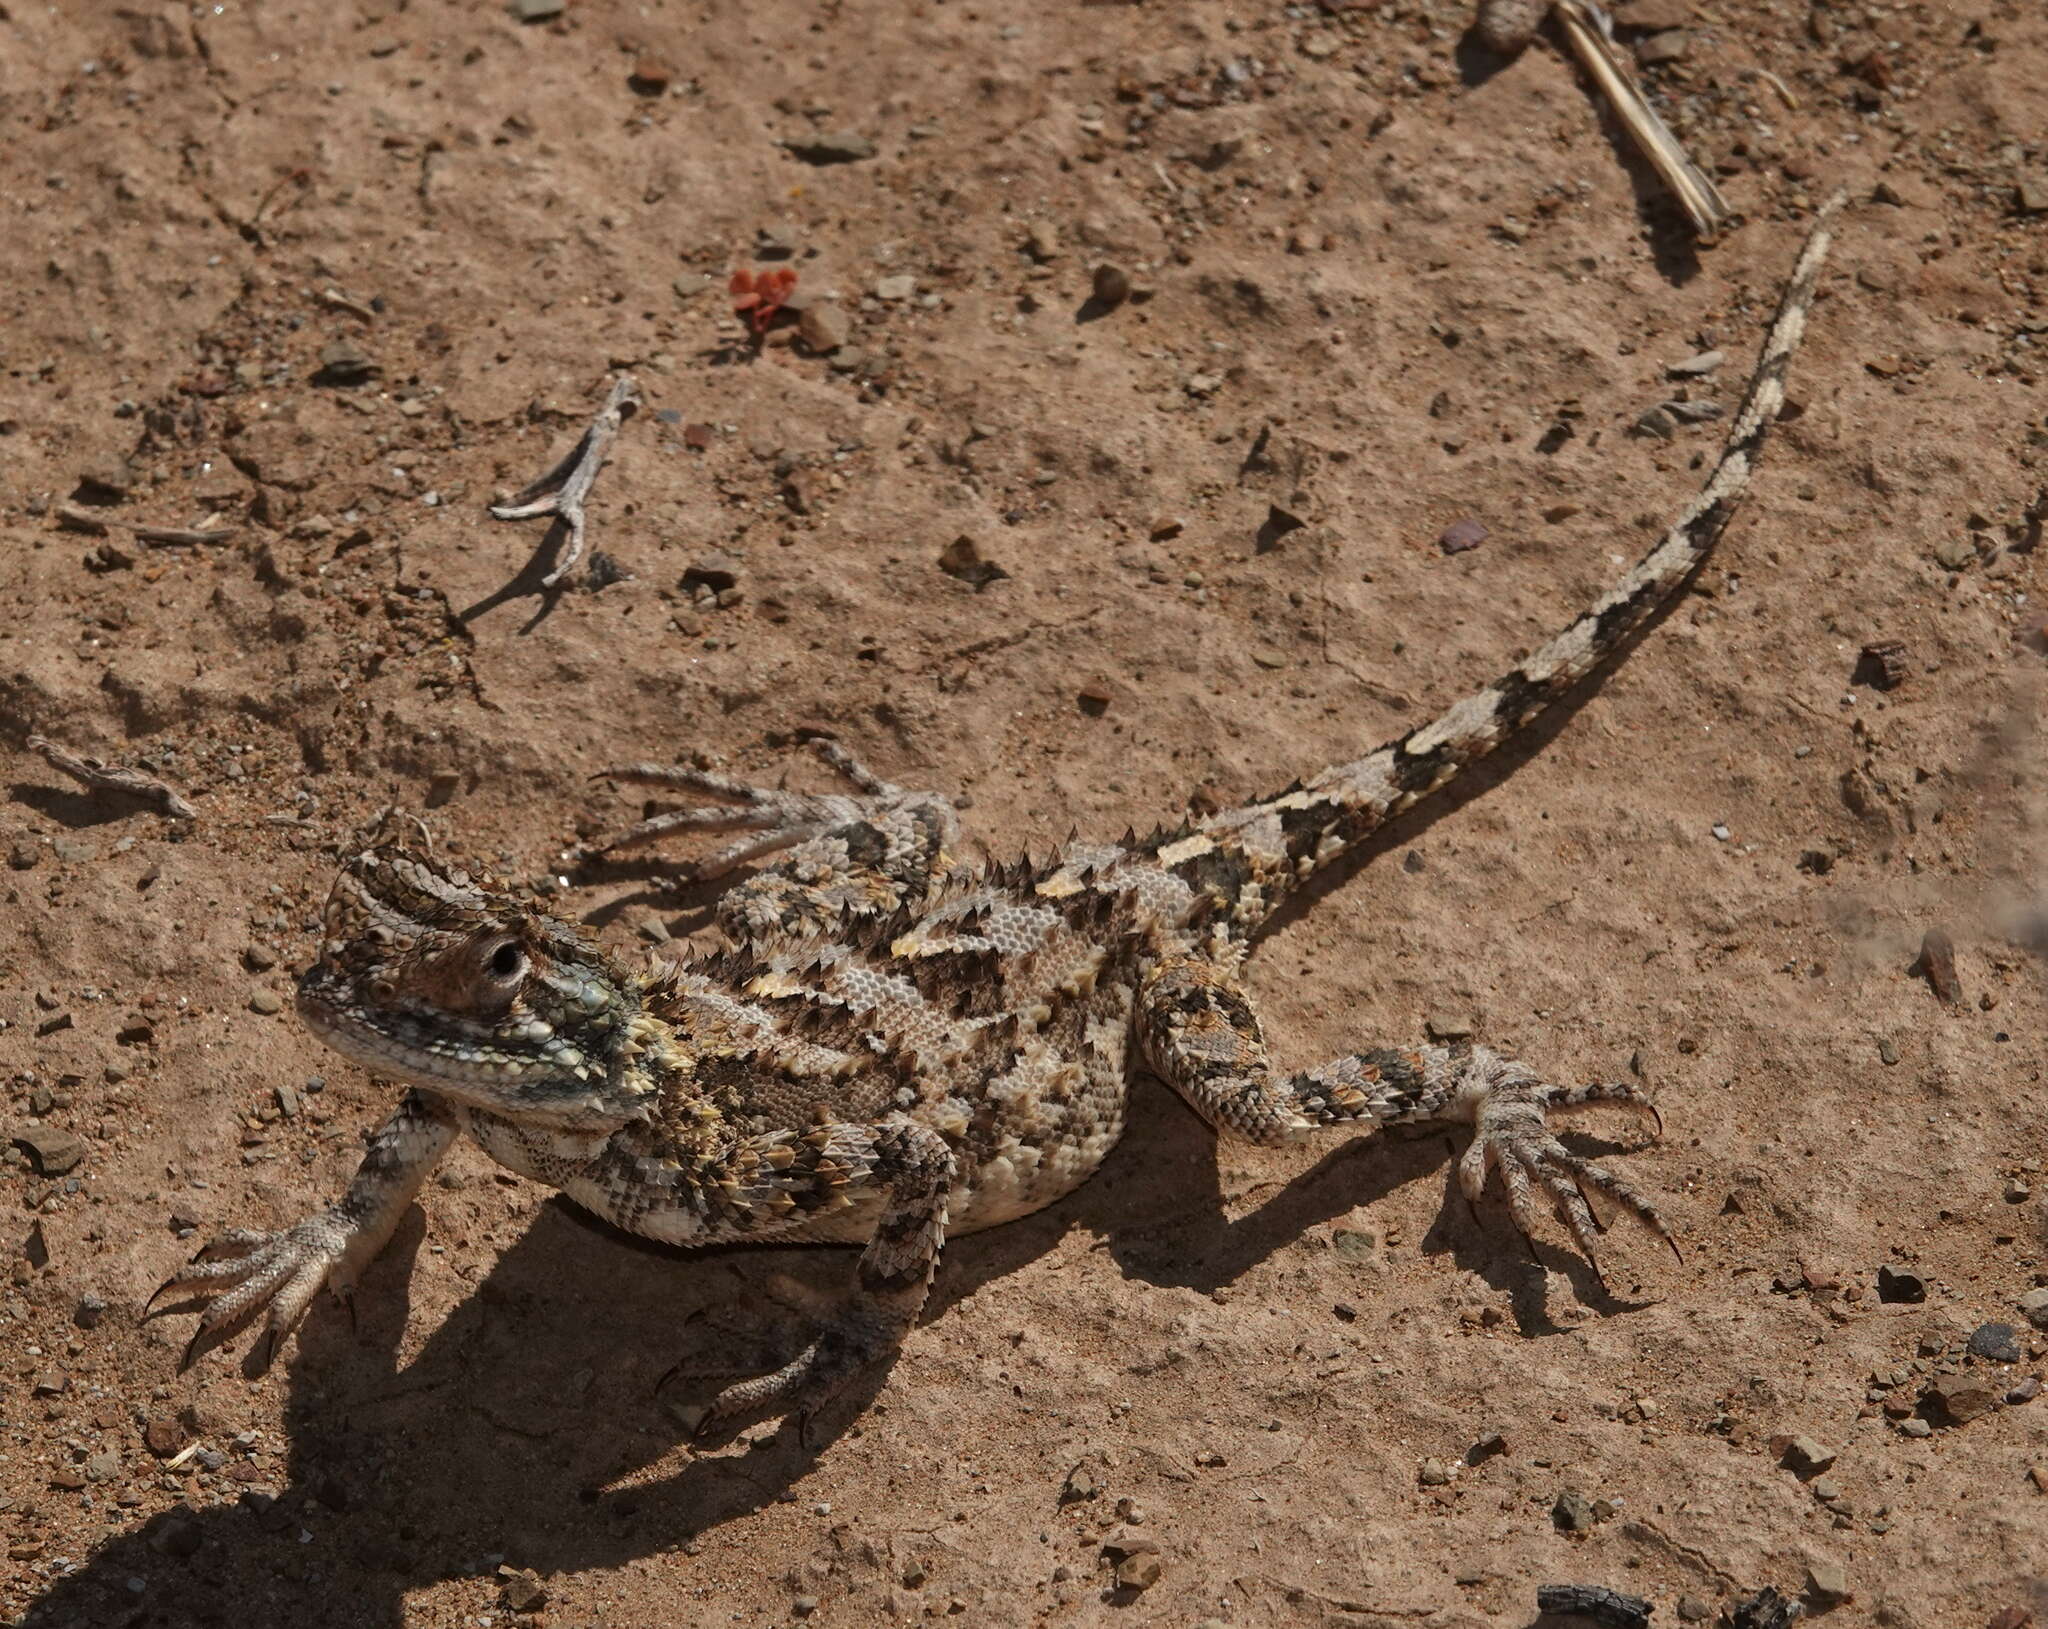 Image of Common Spiny Agama